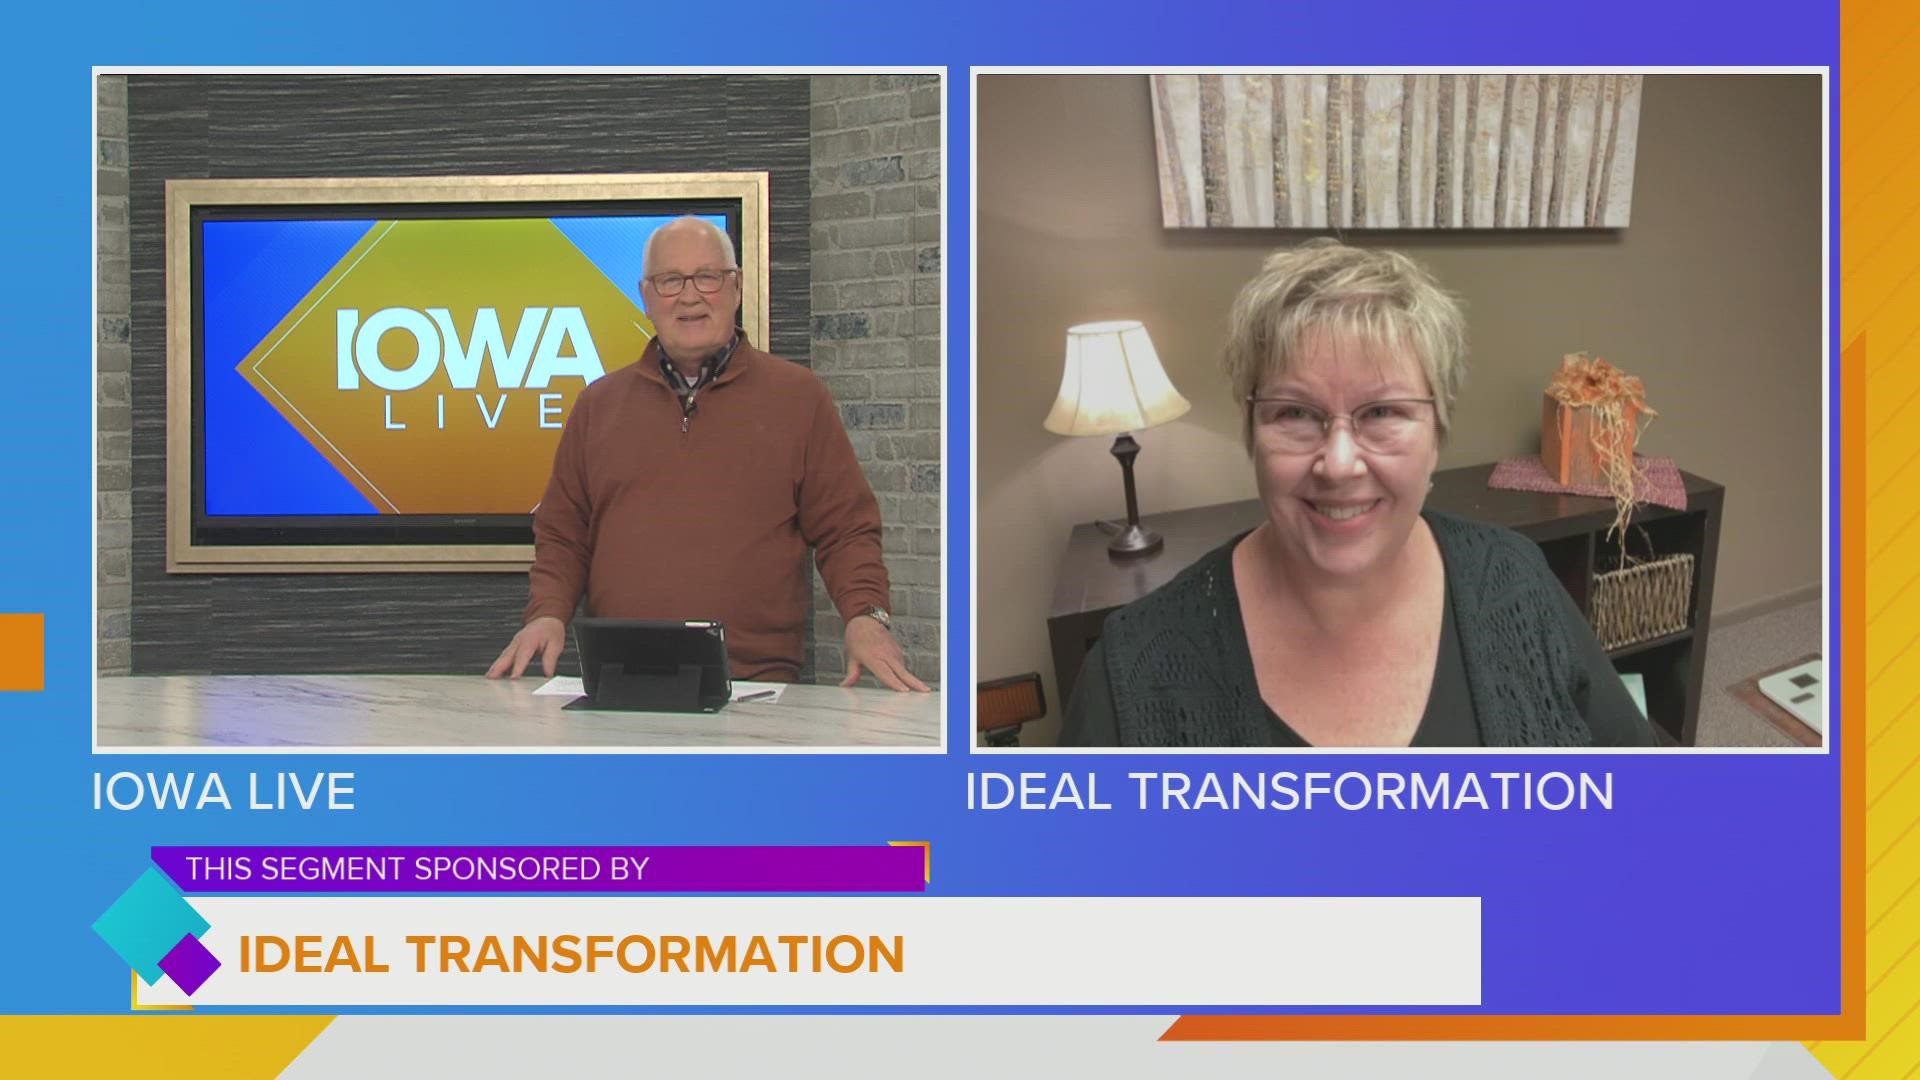 Diana Brown, owner of Ideal Transformation, gives us three tips for healthful eating during Thanksgiving plus a special offer for Iowa Live viewers. | PAID CONTENT